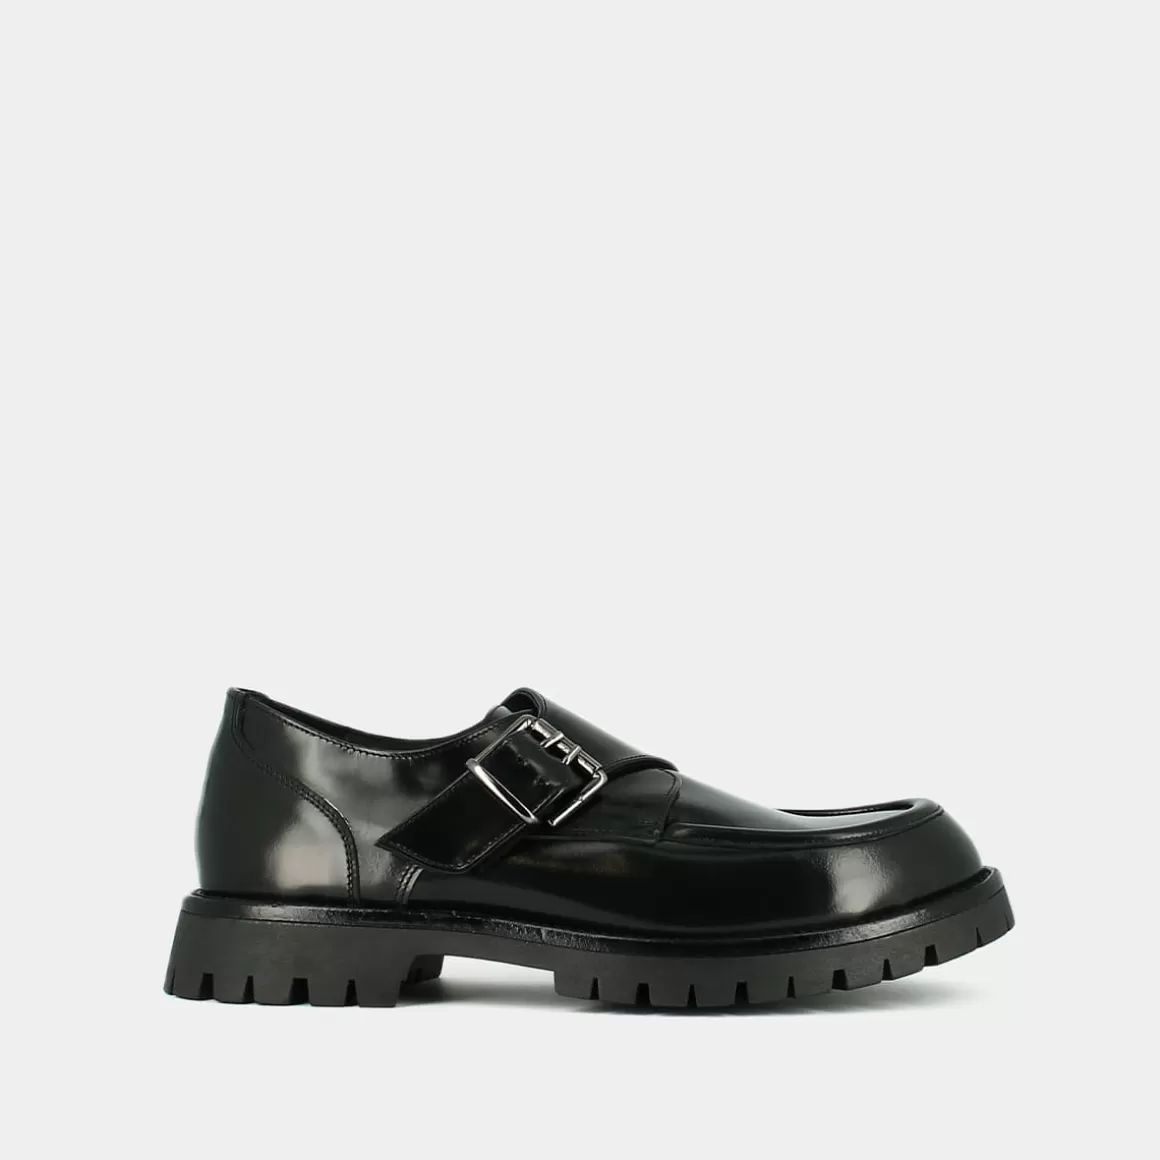 Derbies with flat heels, buckles and visible stitching<Jonak Store